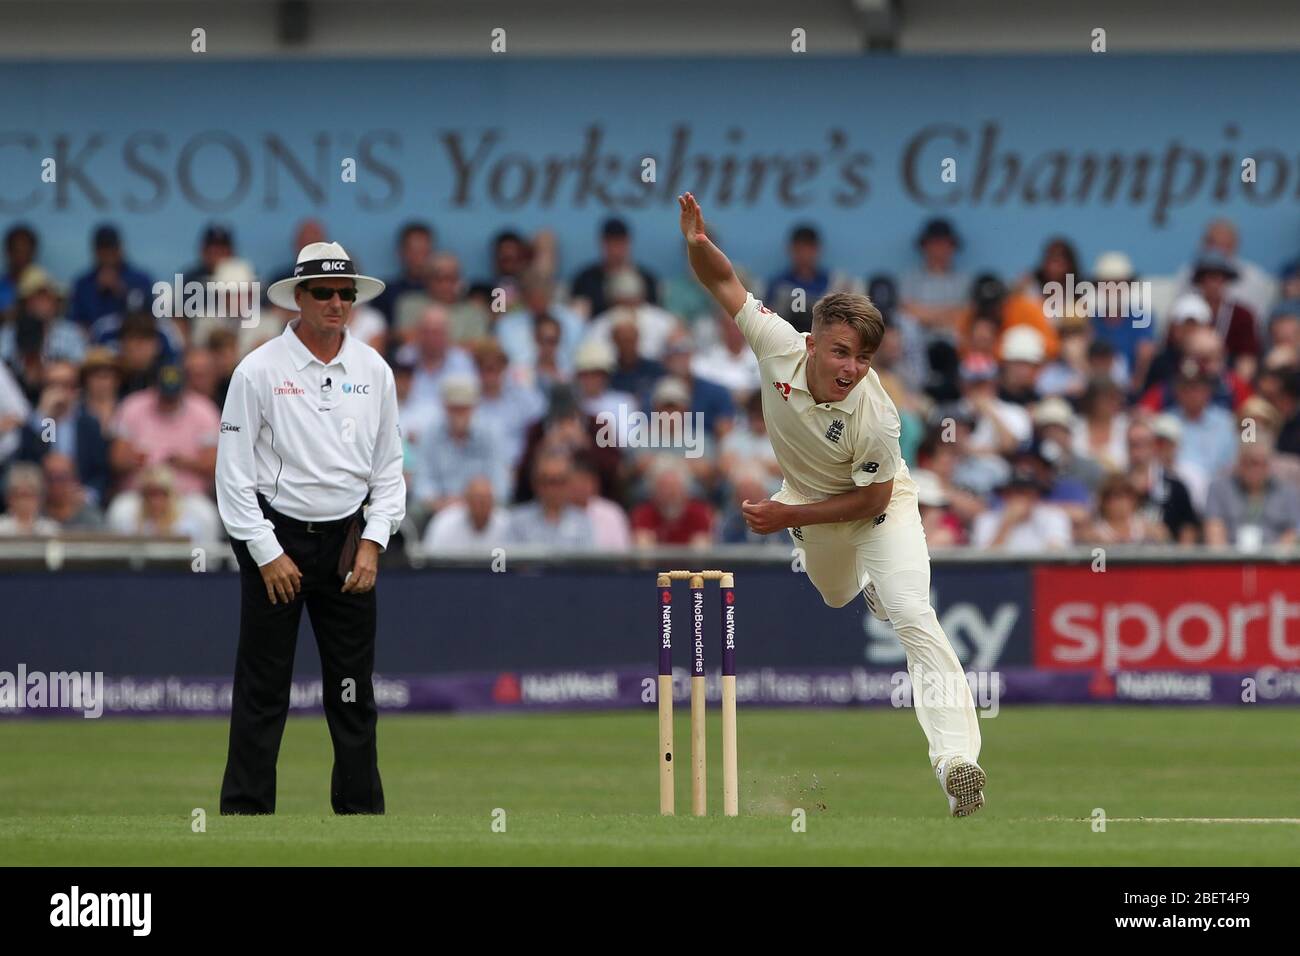 LEEDS, UK - JUNE 1ST Sam Curran of England bowling during the first day of the Second Nat West Test match between England and Pakistan at Headingley Cricket Ground, Leeds on Friday 1st June 2018. (Credit: Mark Fletcher | MI News) Stock Photo